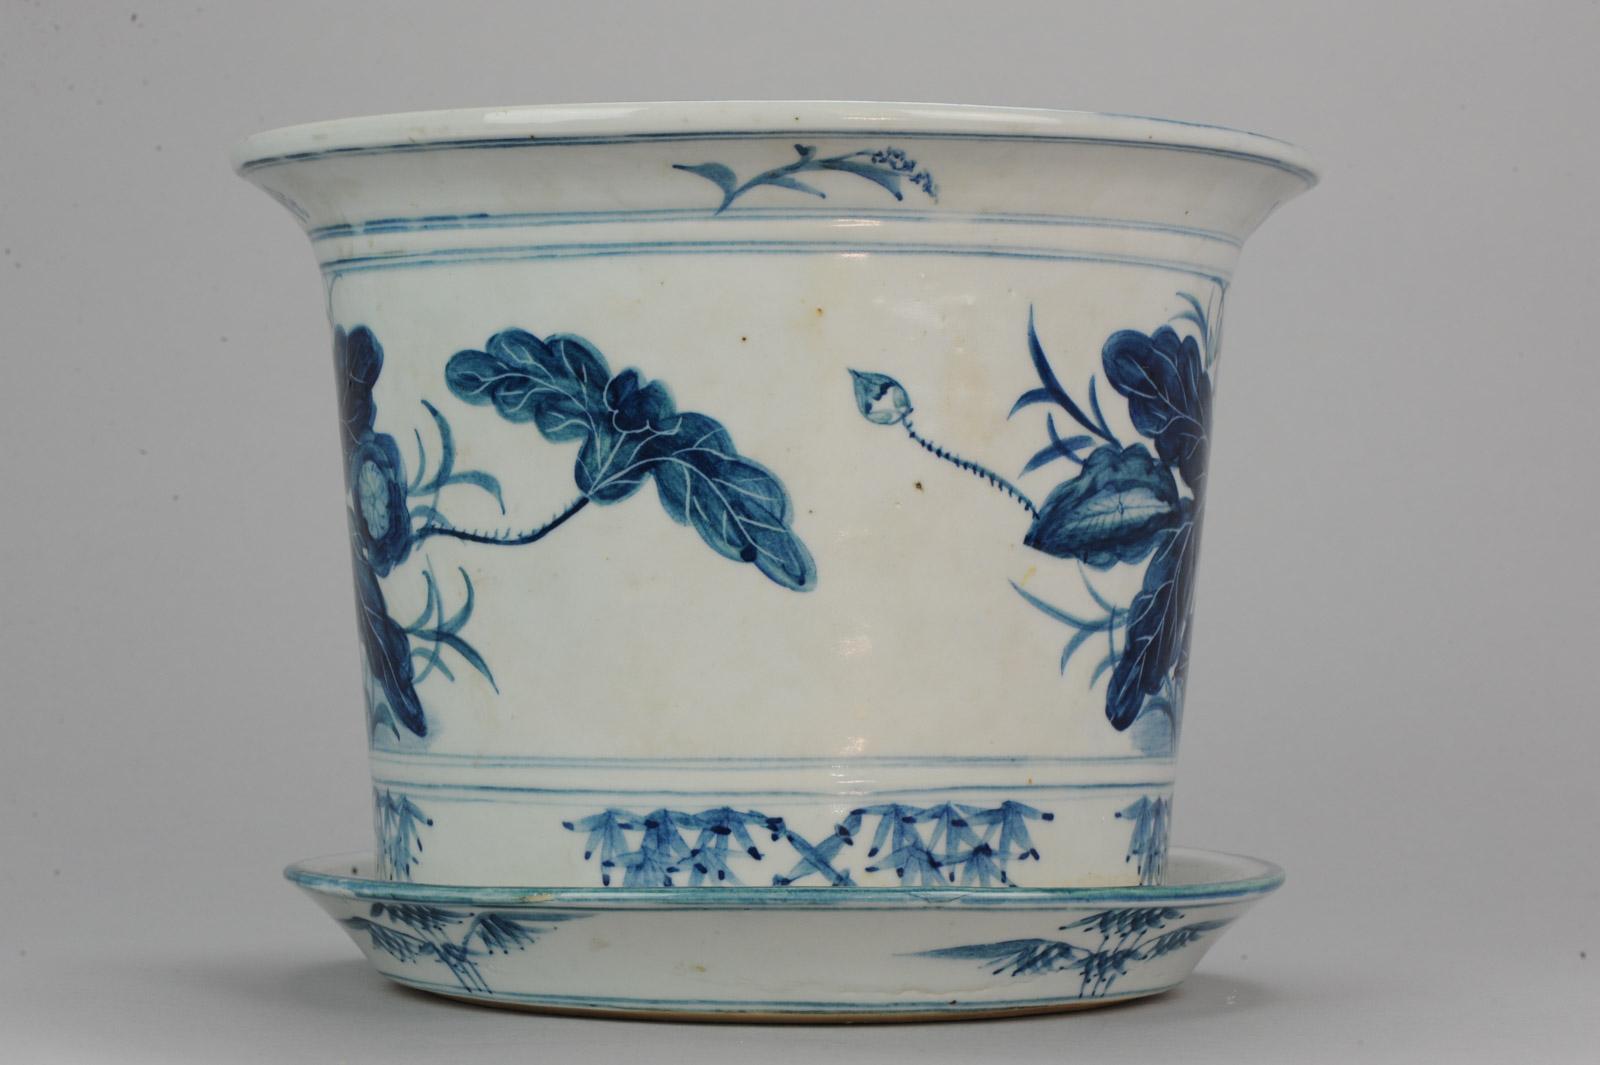 Lovely Chinese porcelain large planter or jardinière.

Condition:
Overall condition perfect; dish seems to have a chip but this is a firing flaw. Size 200mm high approximate and 230mm diameter

Period:
20th century PRoC (1949 - now).